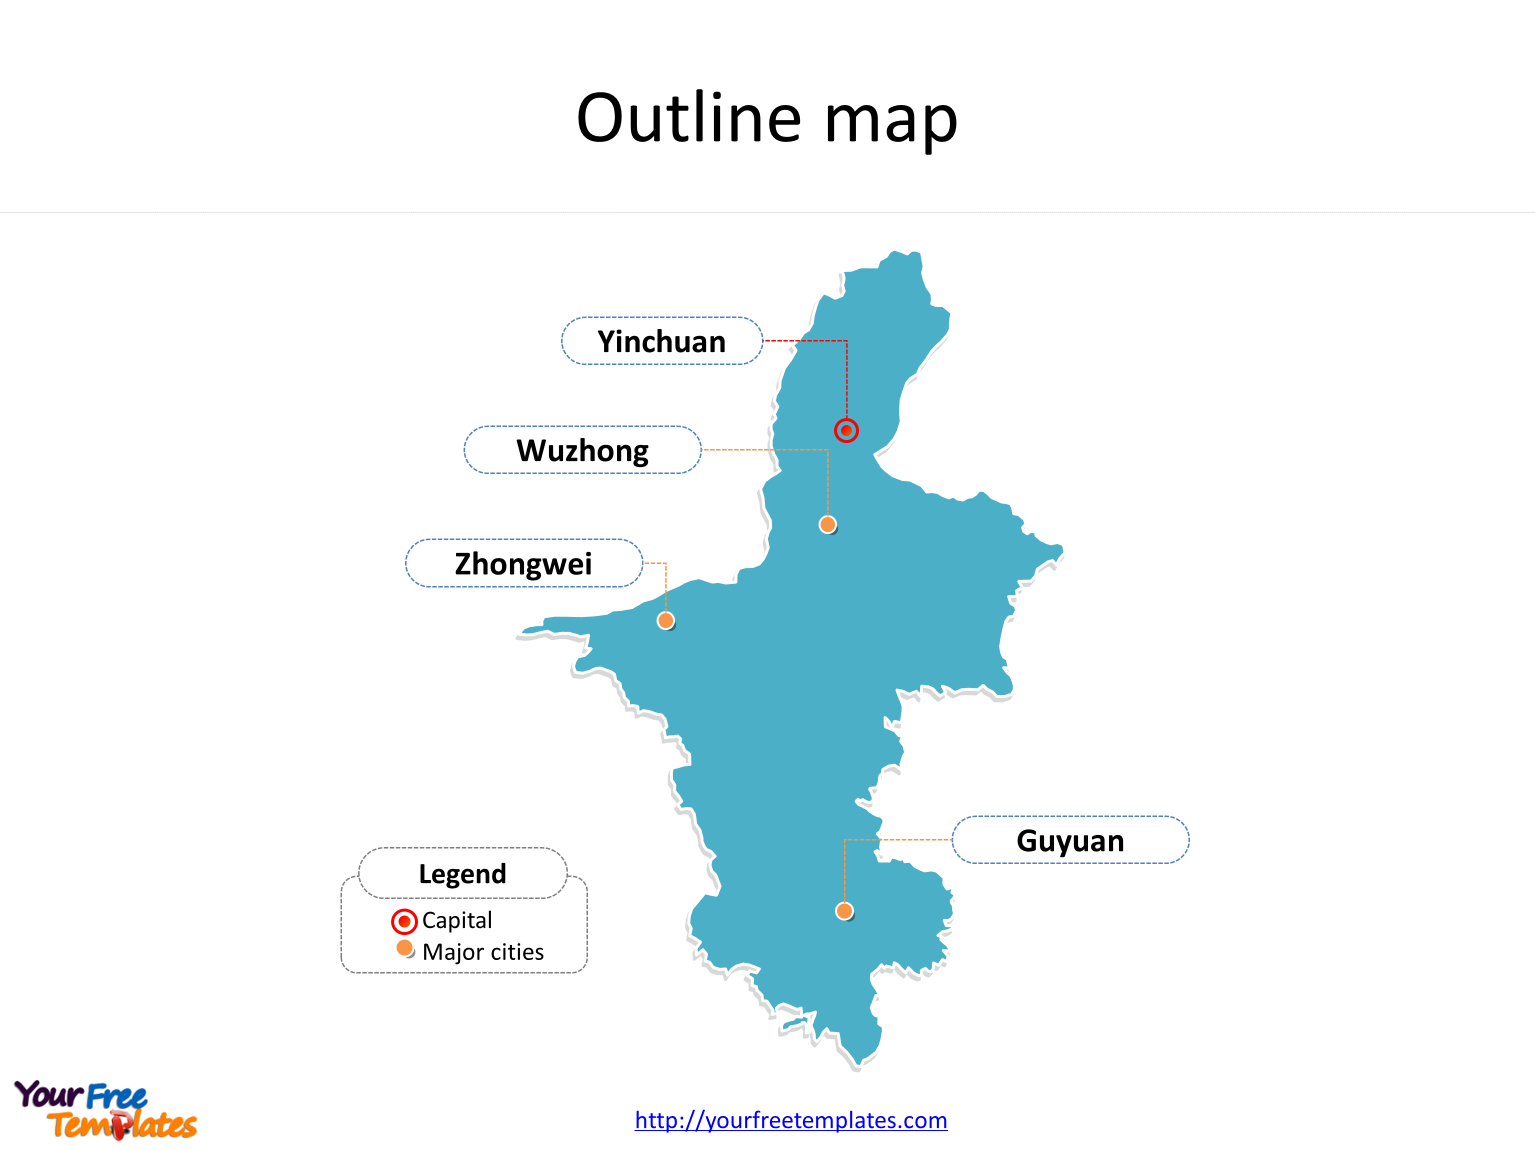 Autonomous Region of Ningxia map with outline and cities labeled on the Ningxia maps PowerPoint templates